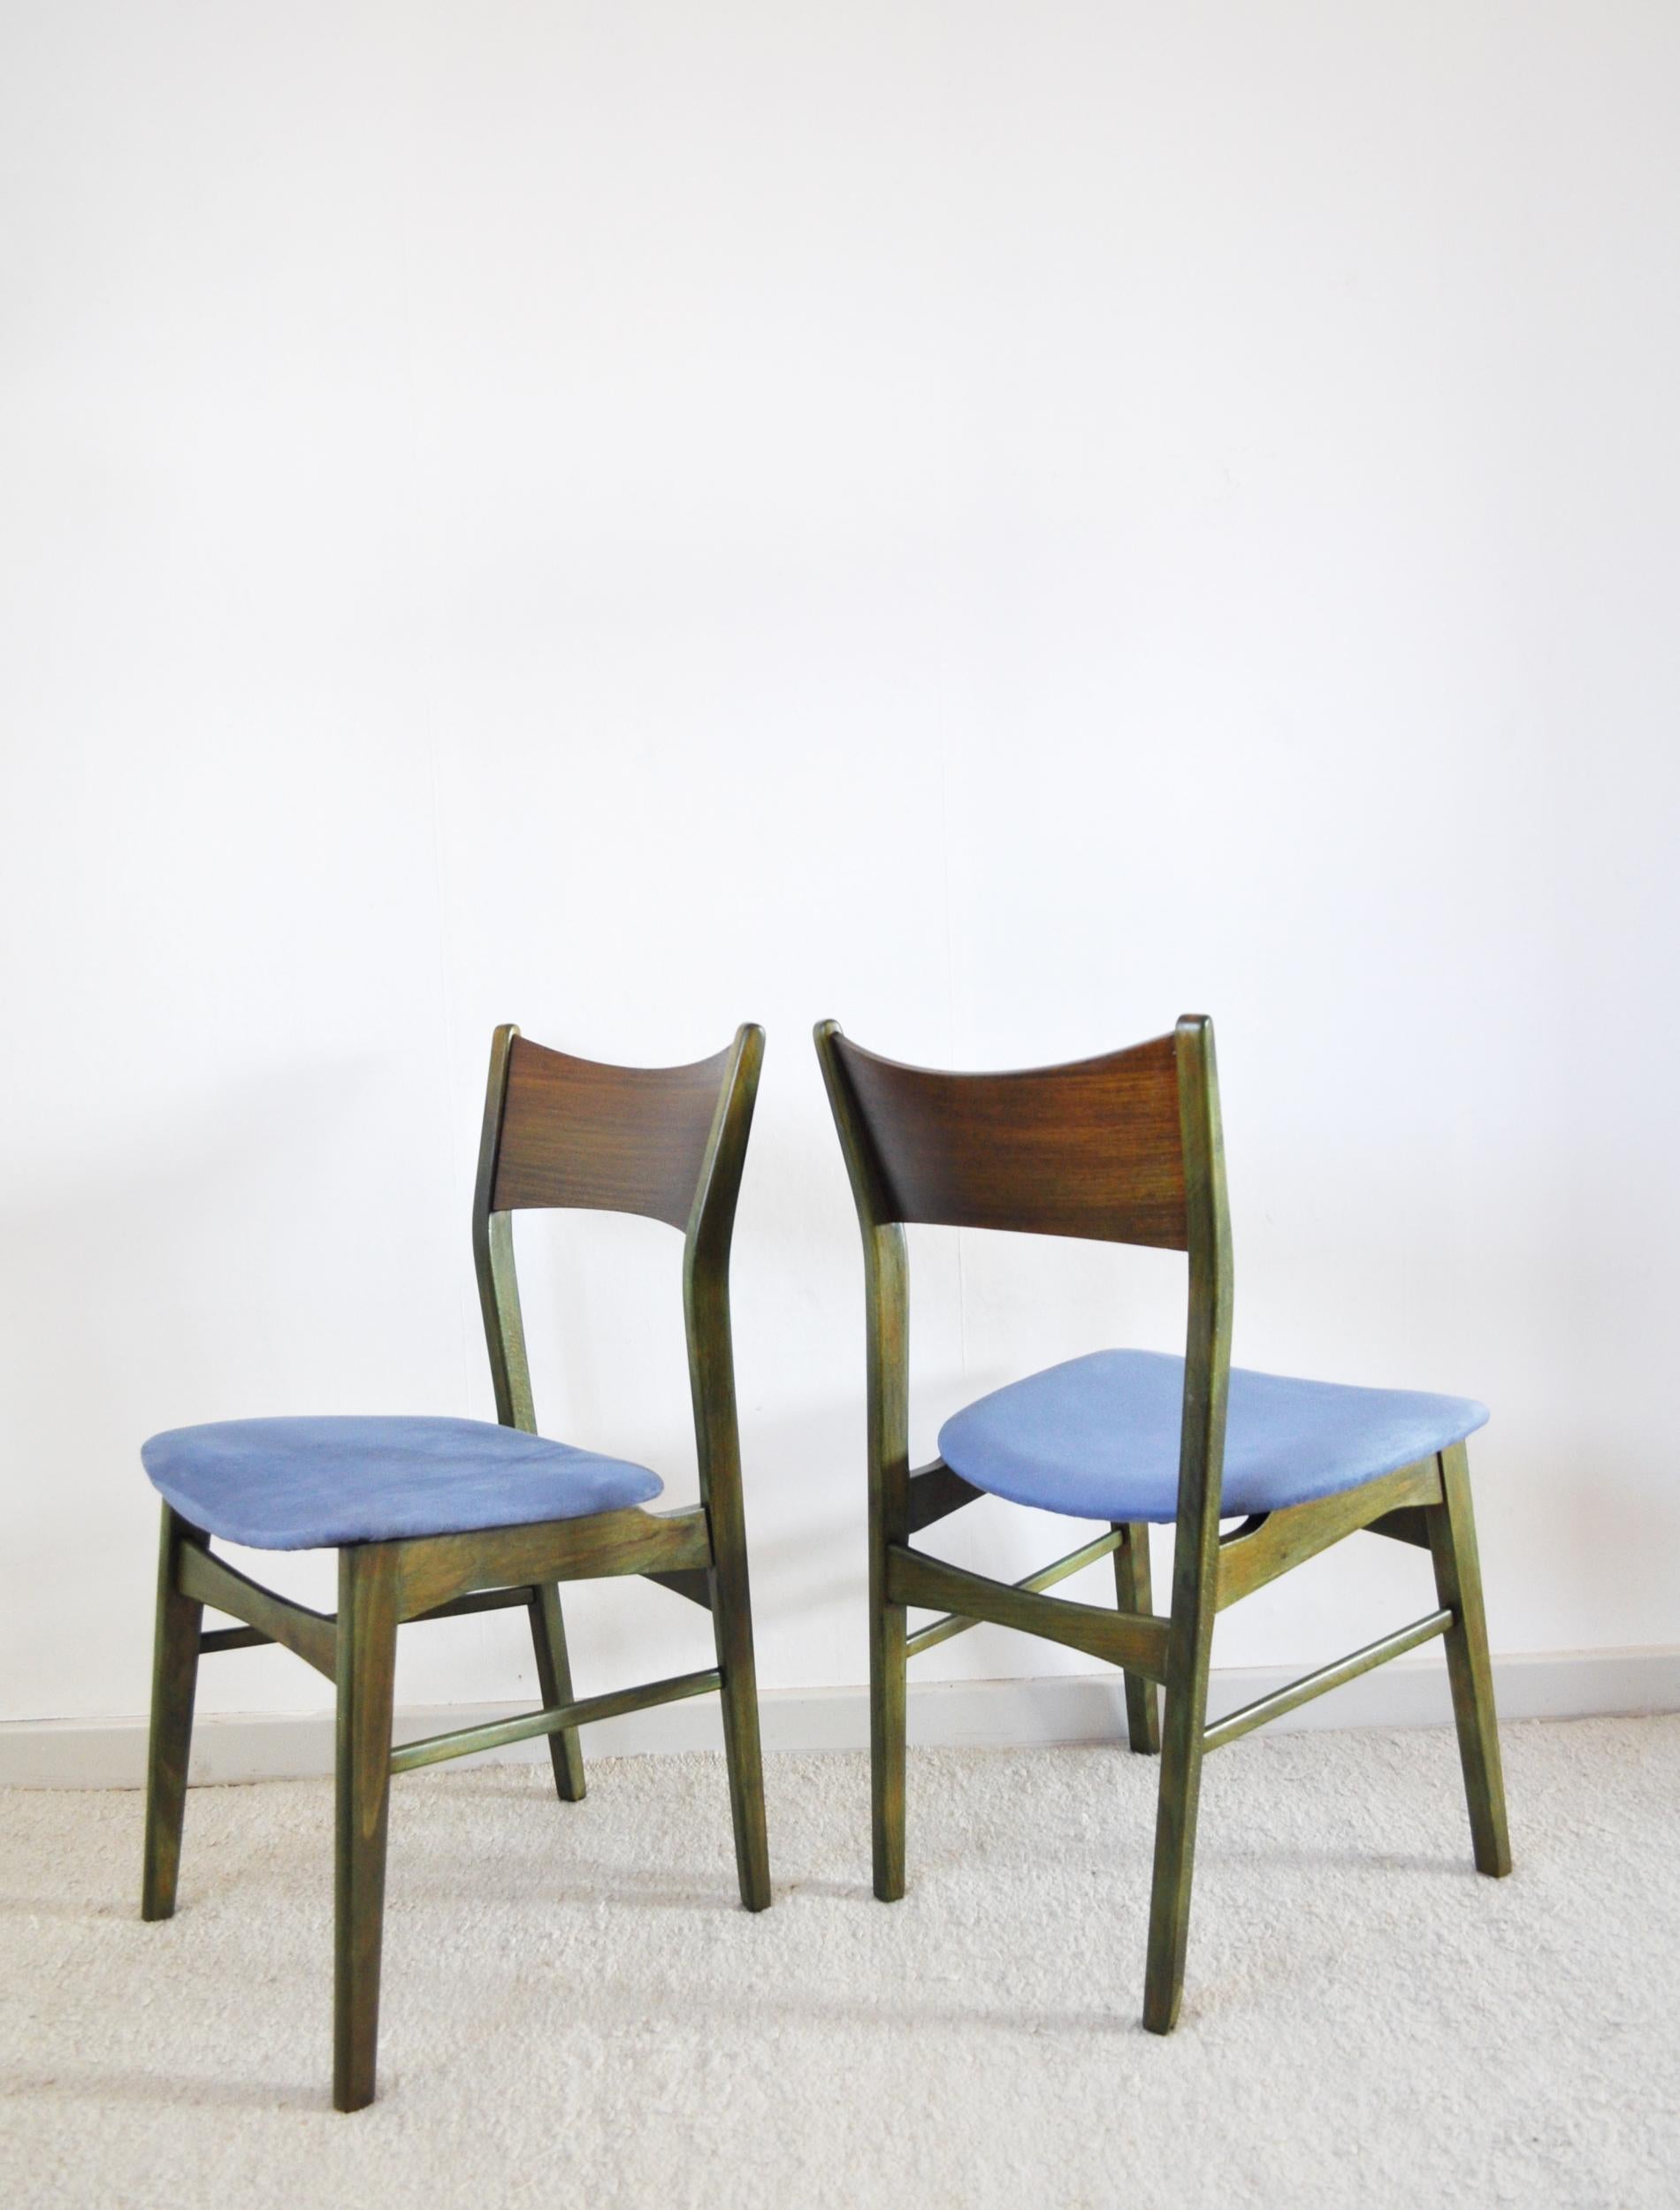 Beech Danish Modern Dining Chair Stained in an Emerald Color, 1960s For Sale